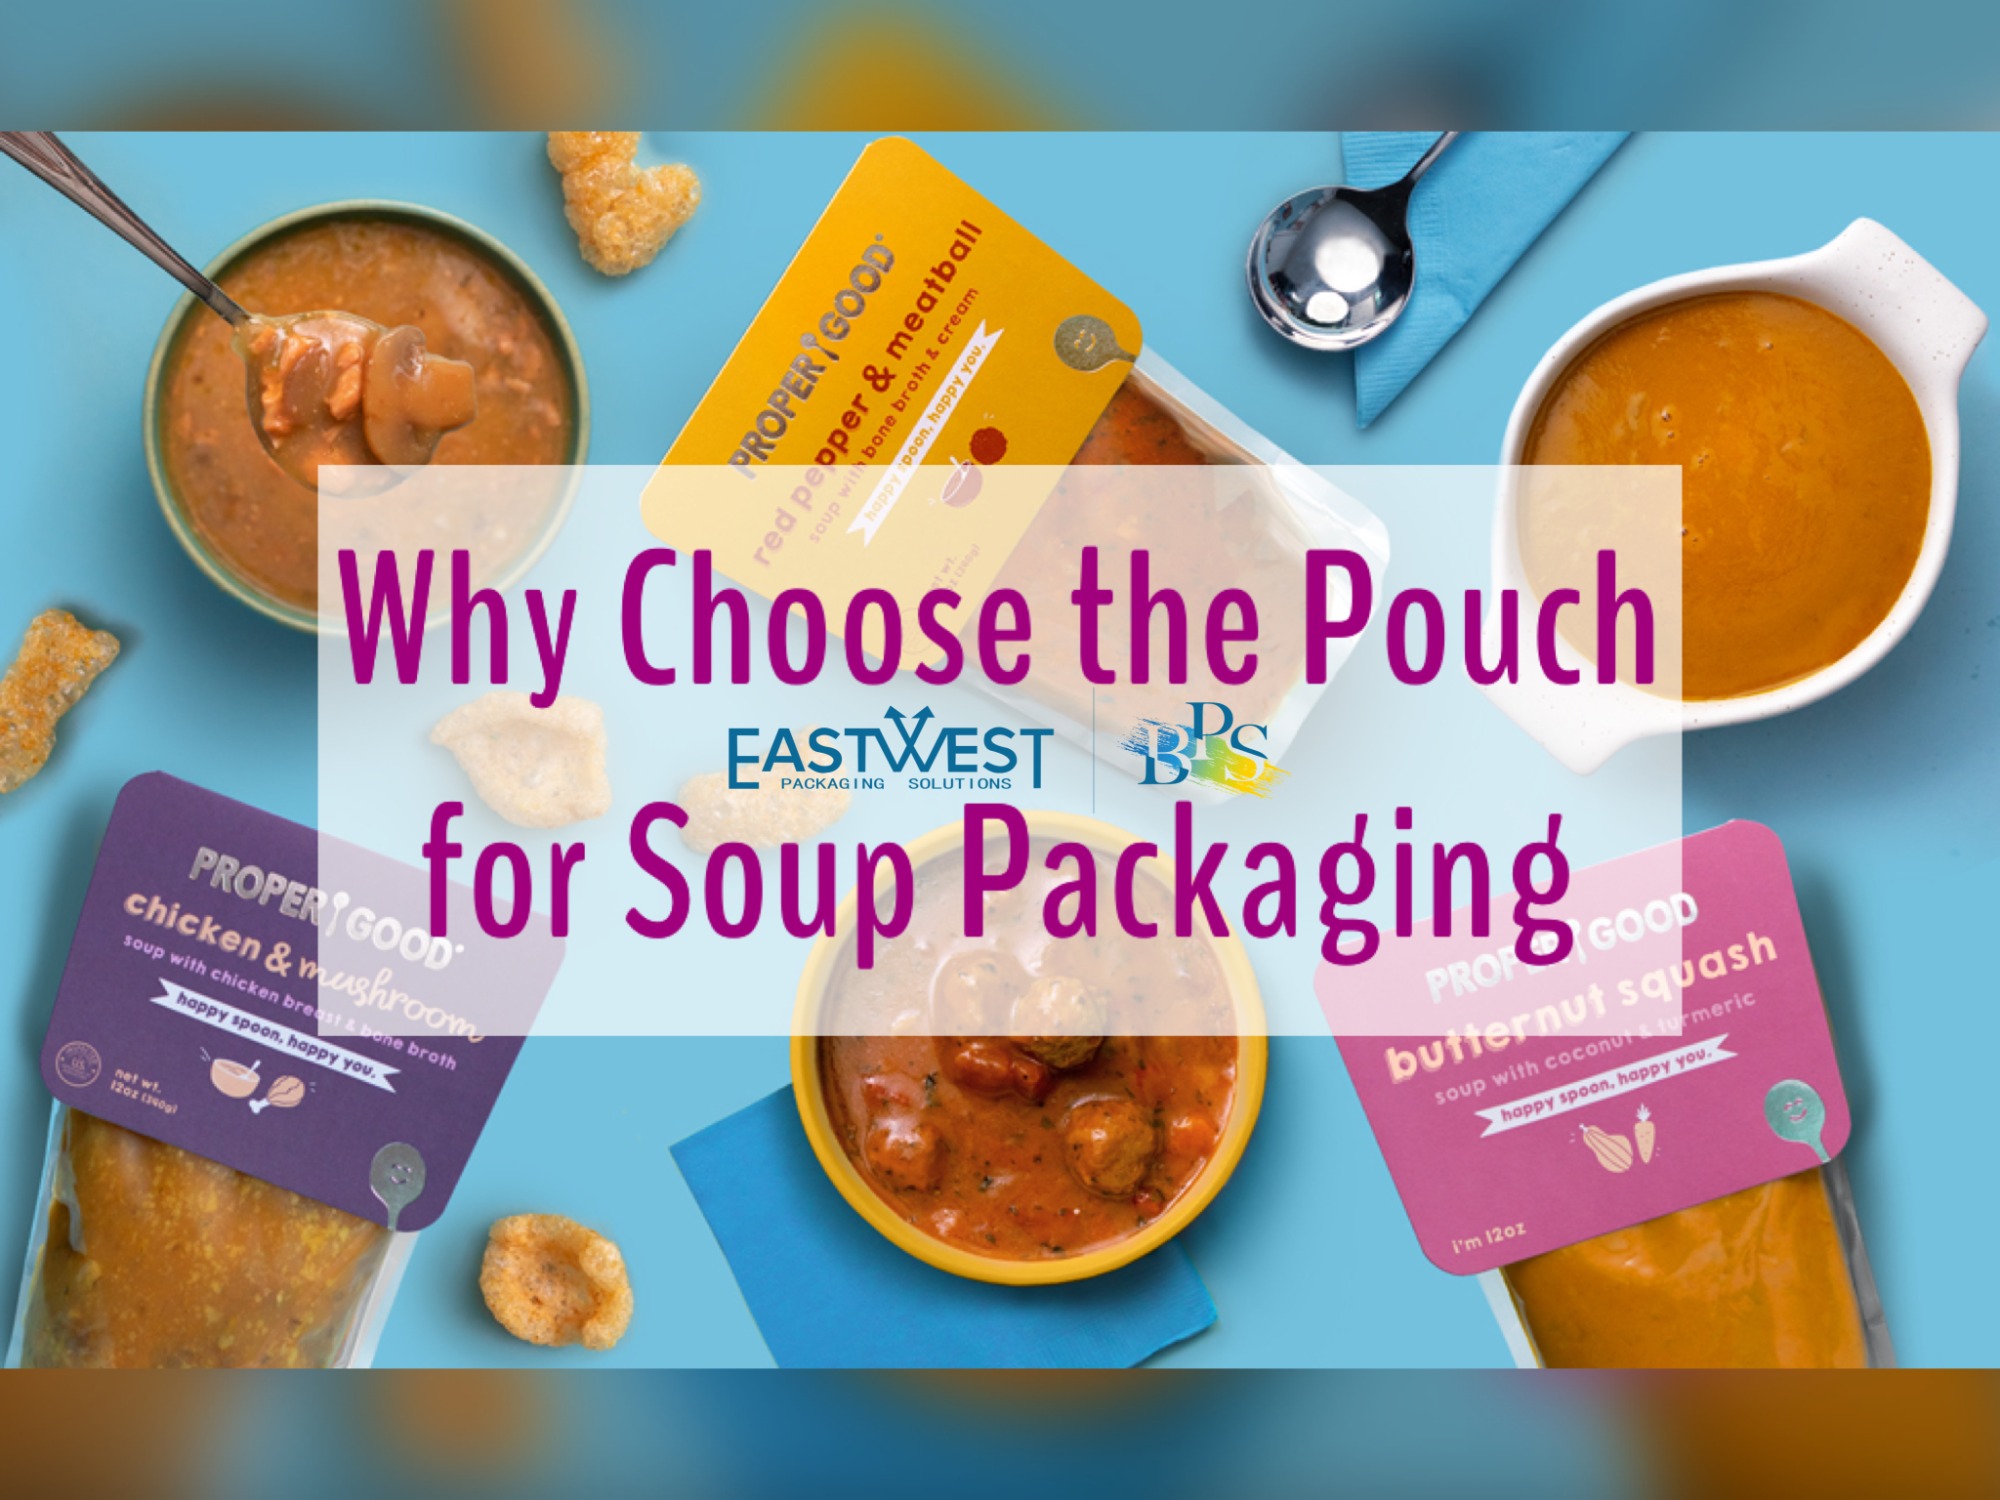 Why Choose the Pouch for Soup Packaging?